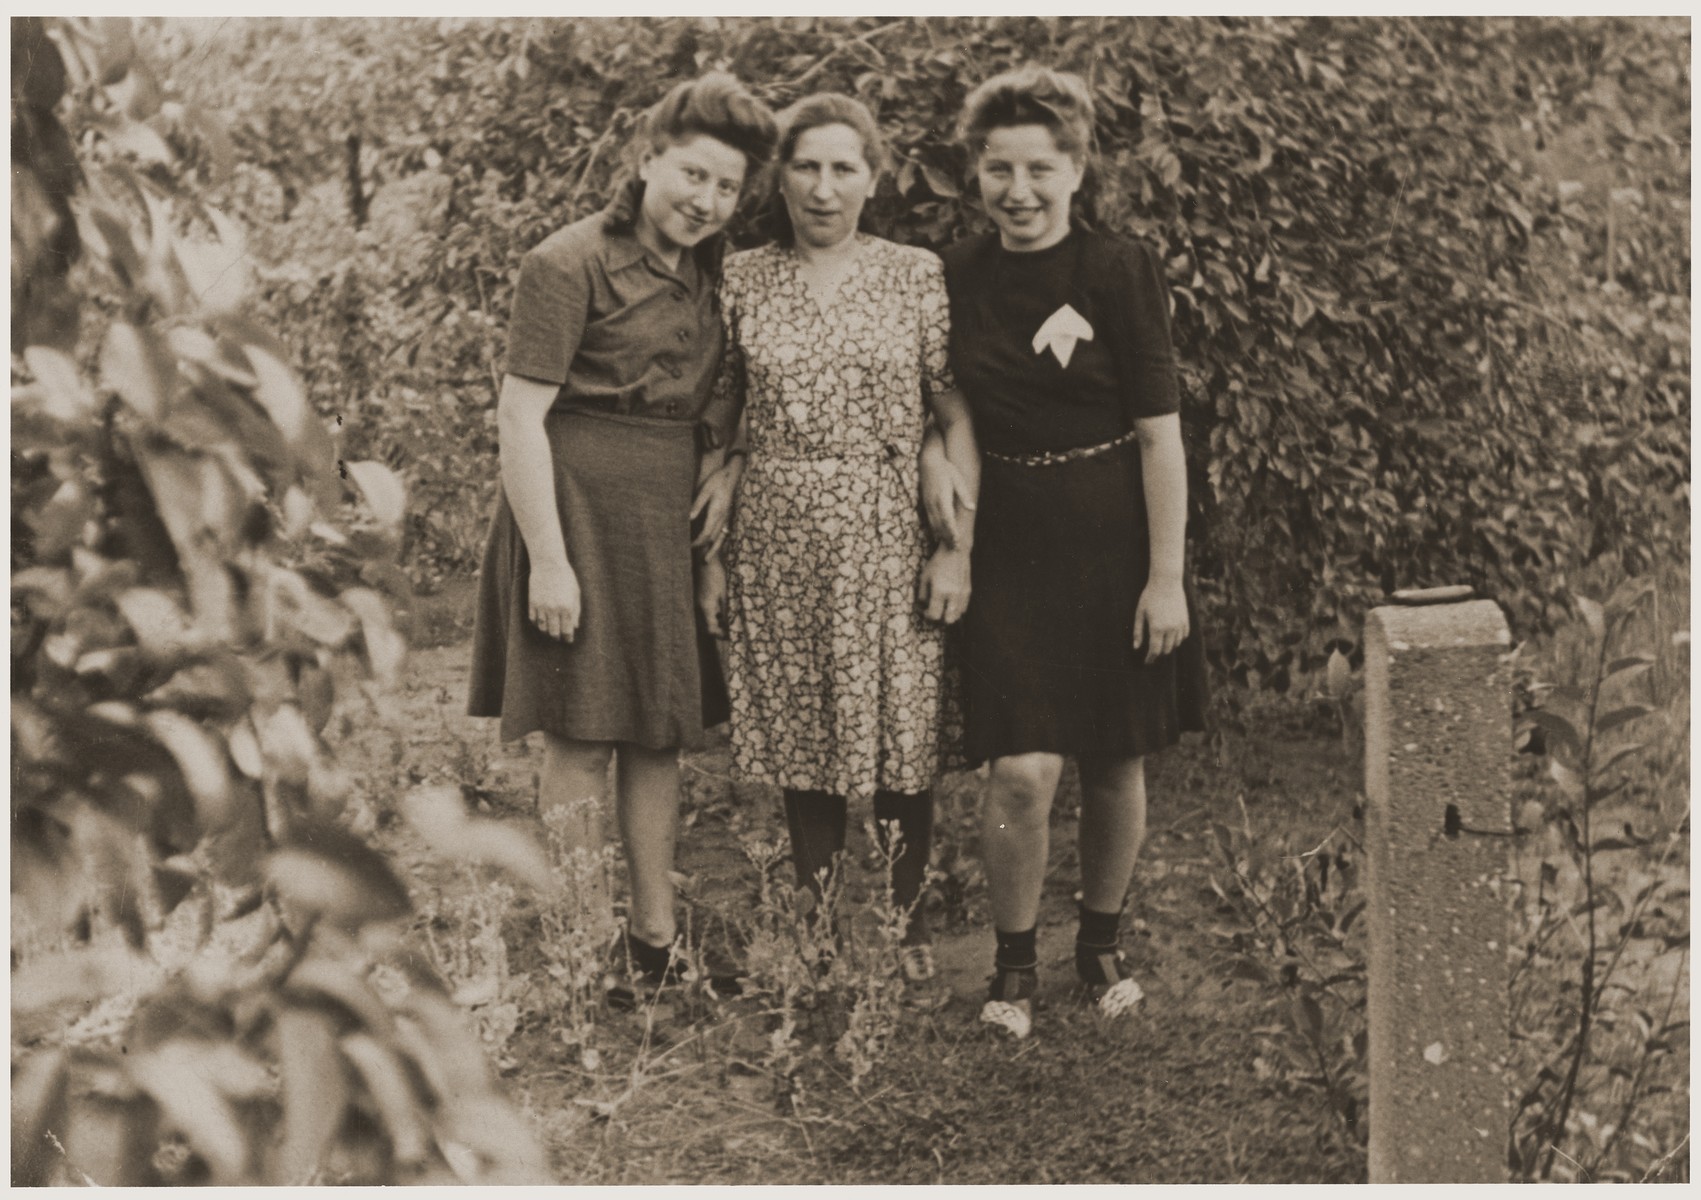 A Jewish mother poses with her two daughters at the Fuerth displaced persons camp.

Pictured are Cyla Goldman with her daughters, Hania (right) and Rachela (left).